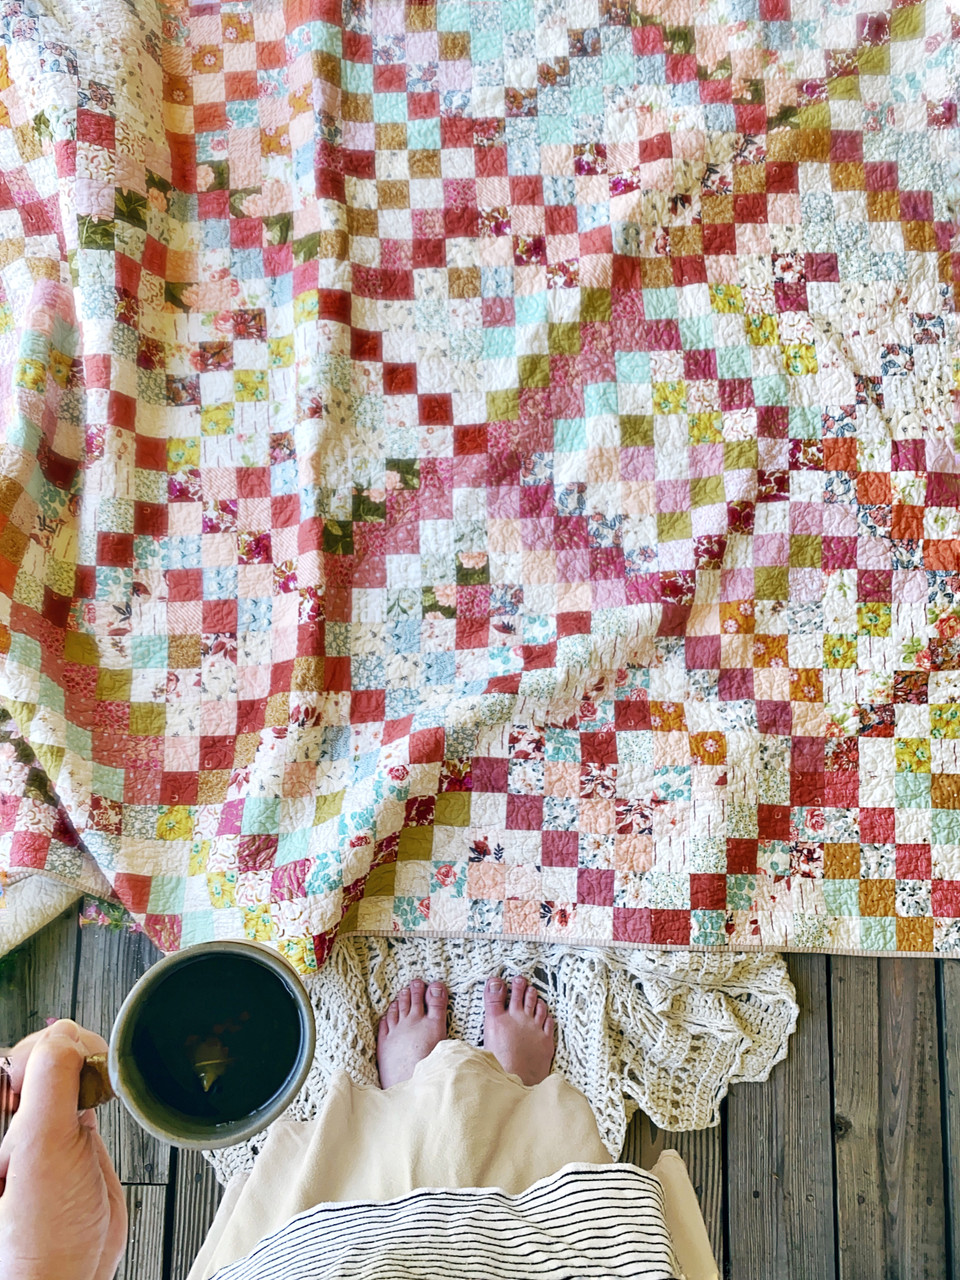 Quilt Patterns - Charming Jelly Roll Quilts